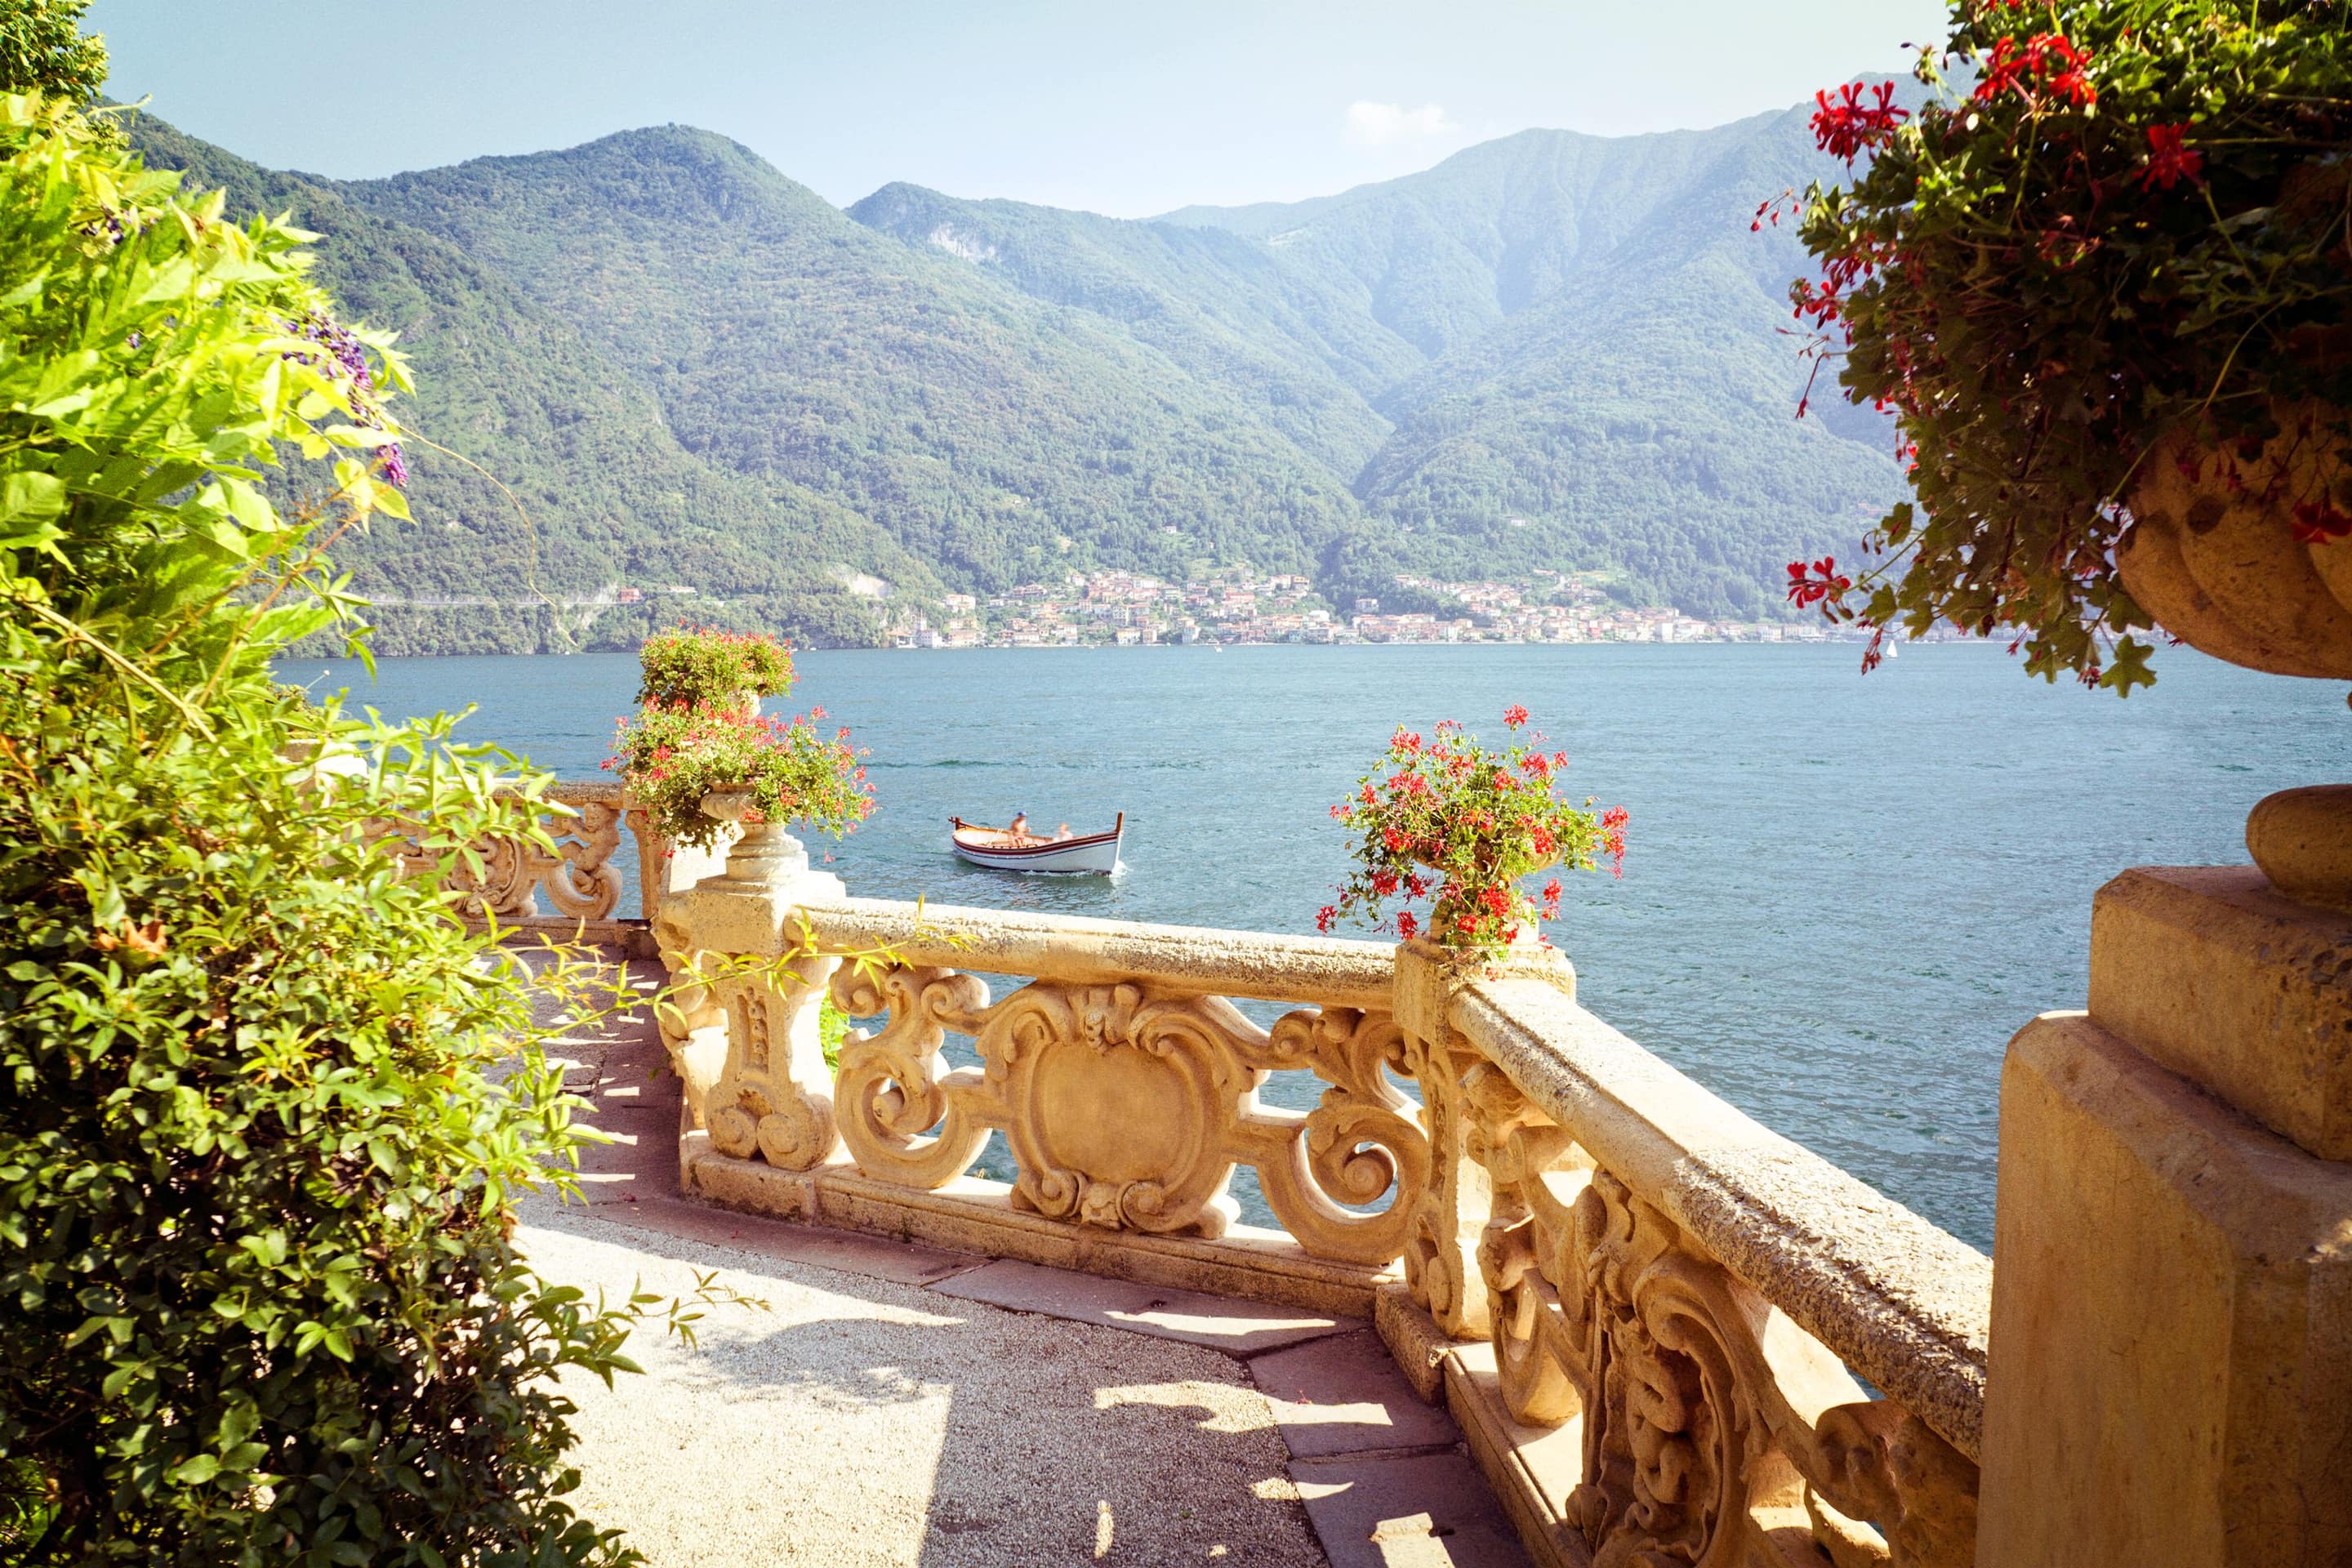 View of Lake Como from a sun-drenched patio